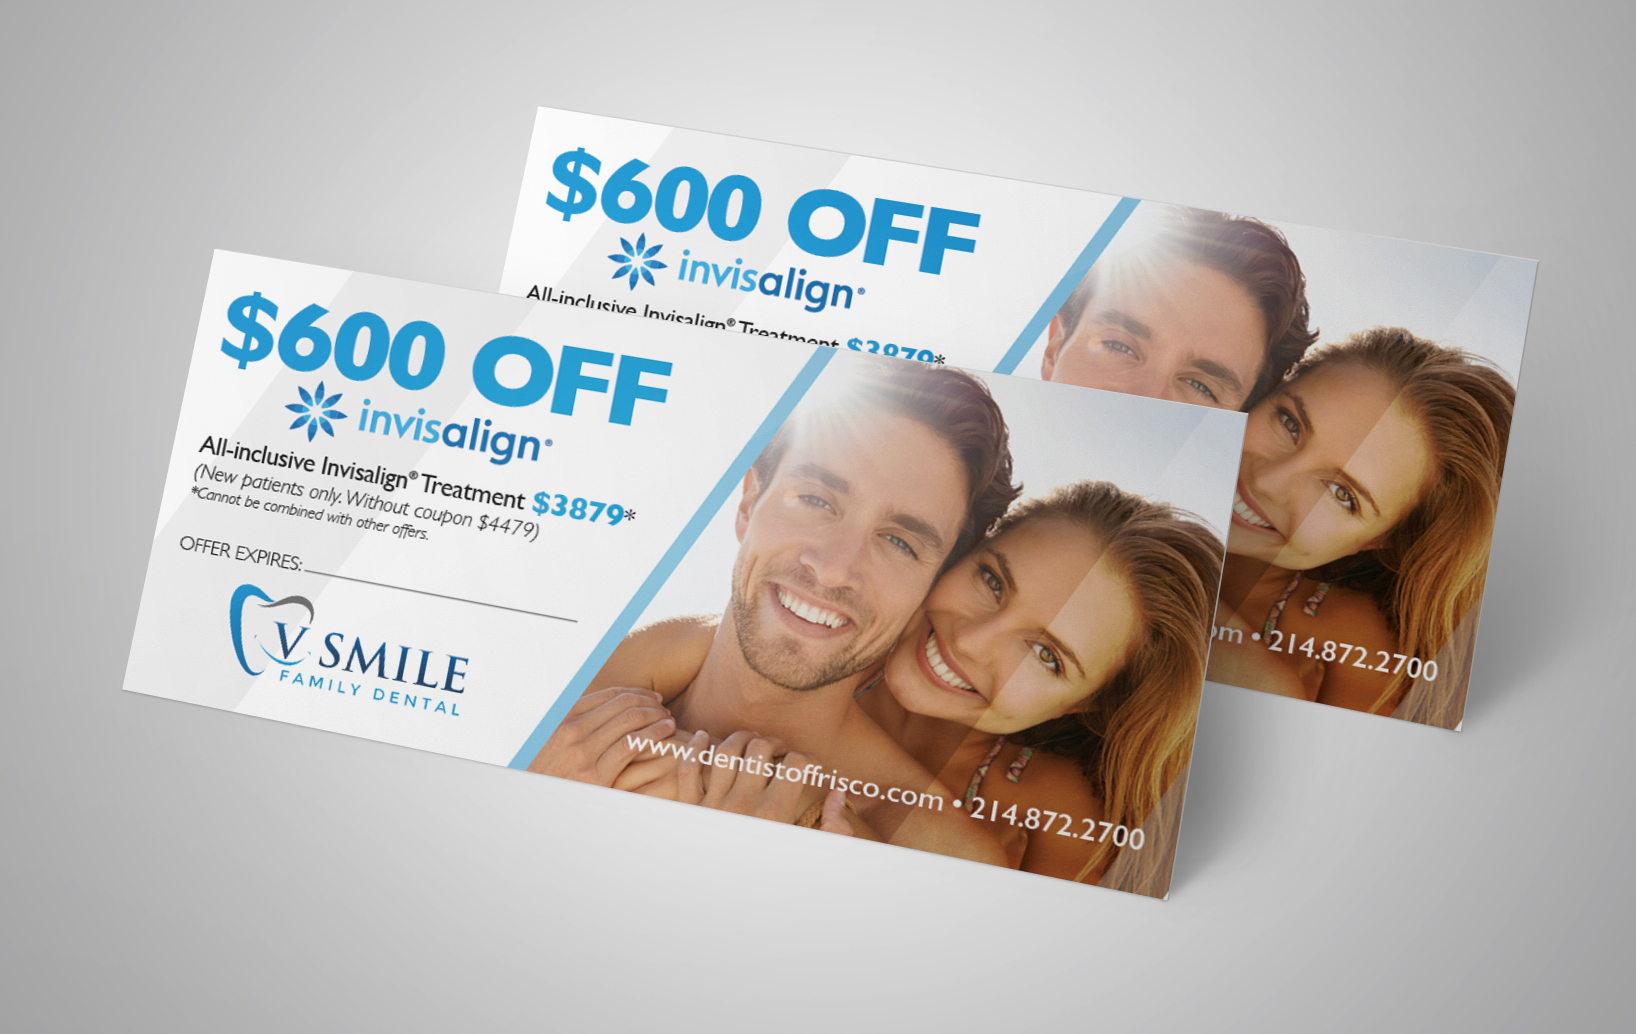 image of invisalign® coupon